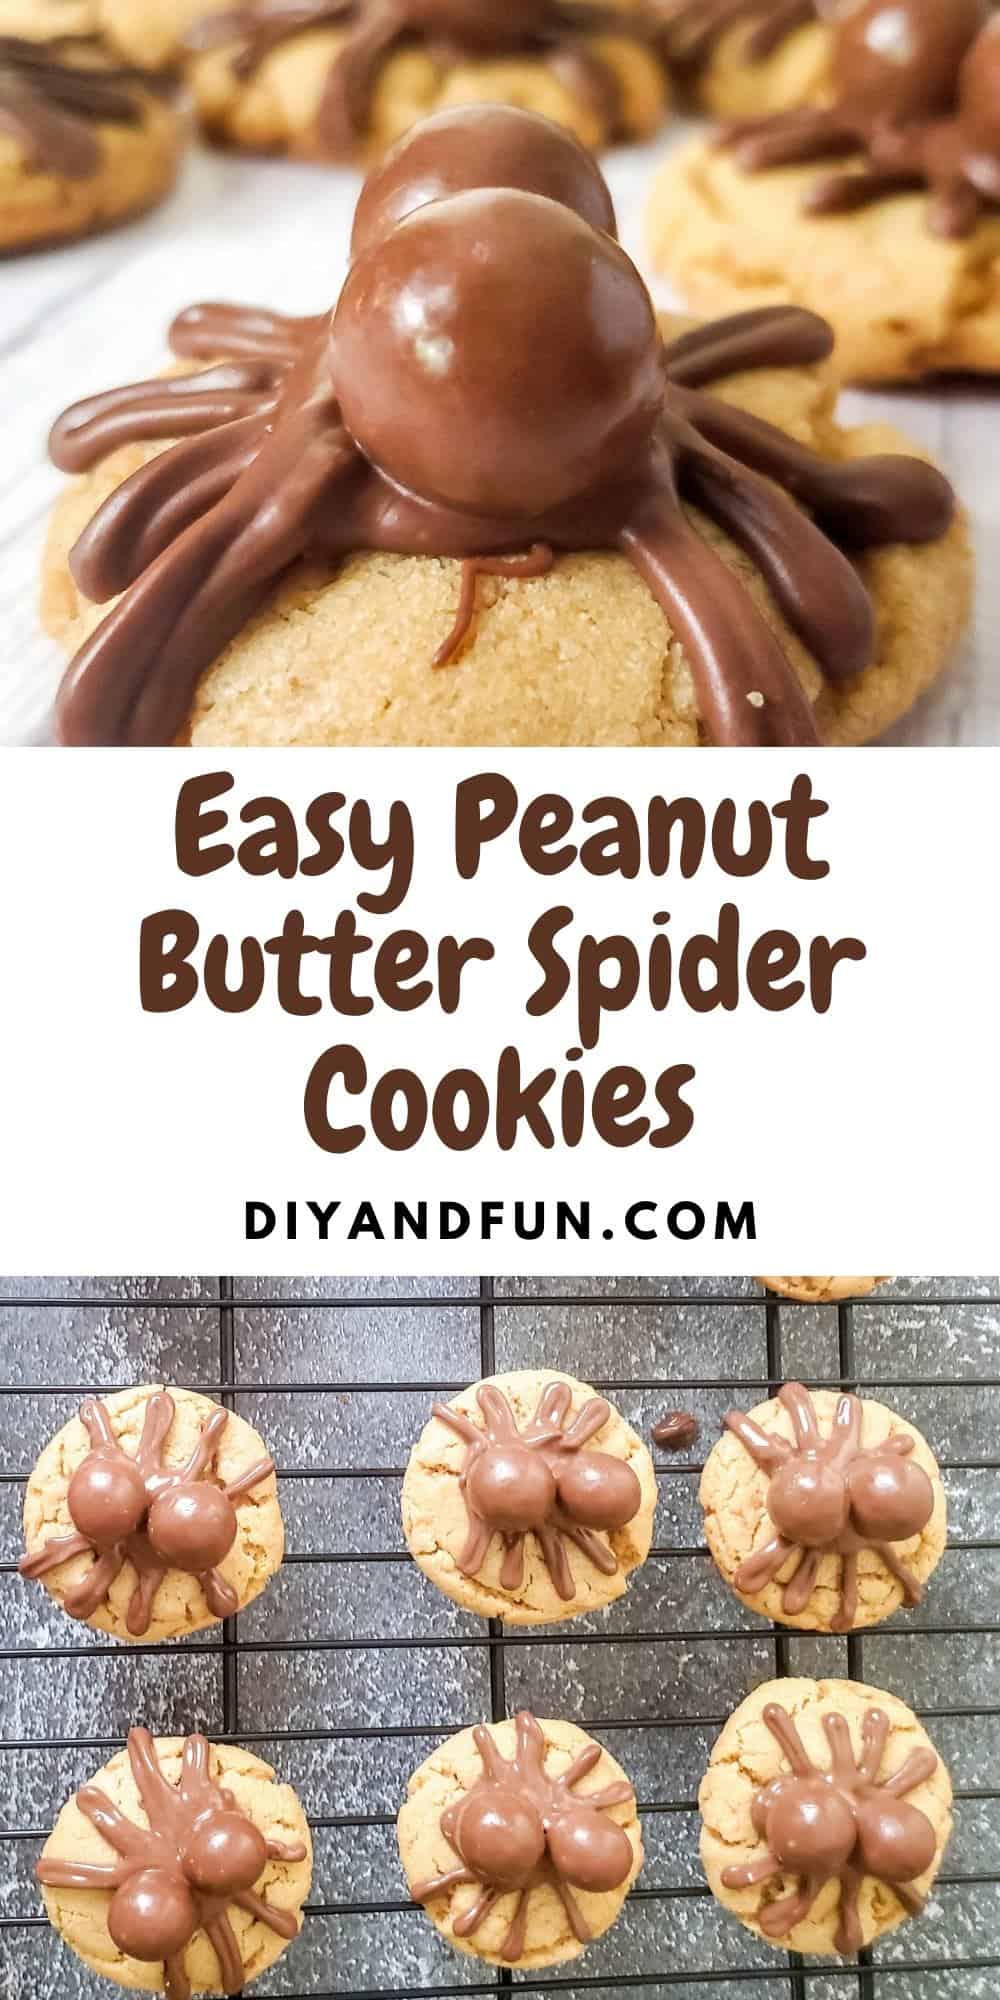 Easy Peanut Butter Spider Cookies, a simple Halloween inspired dessert recipe idea for  peanut butter cookies topped with chocolate spiders.